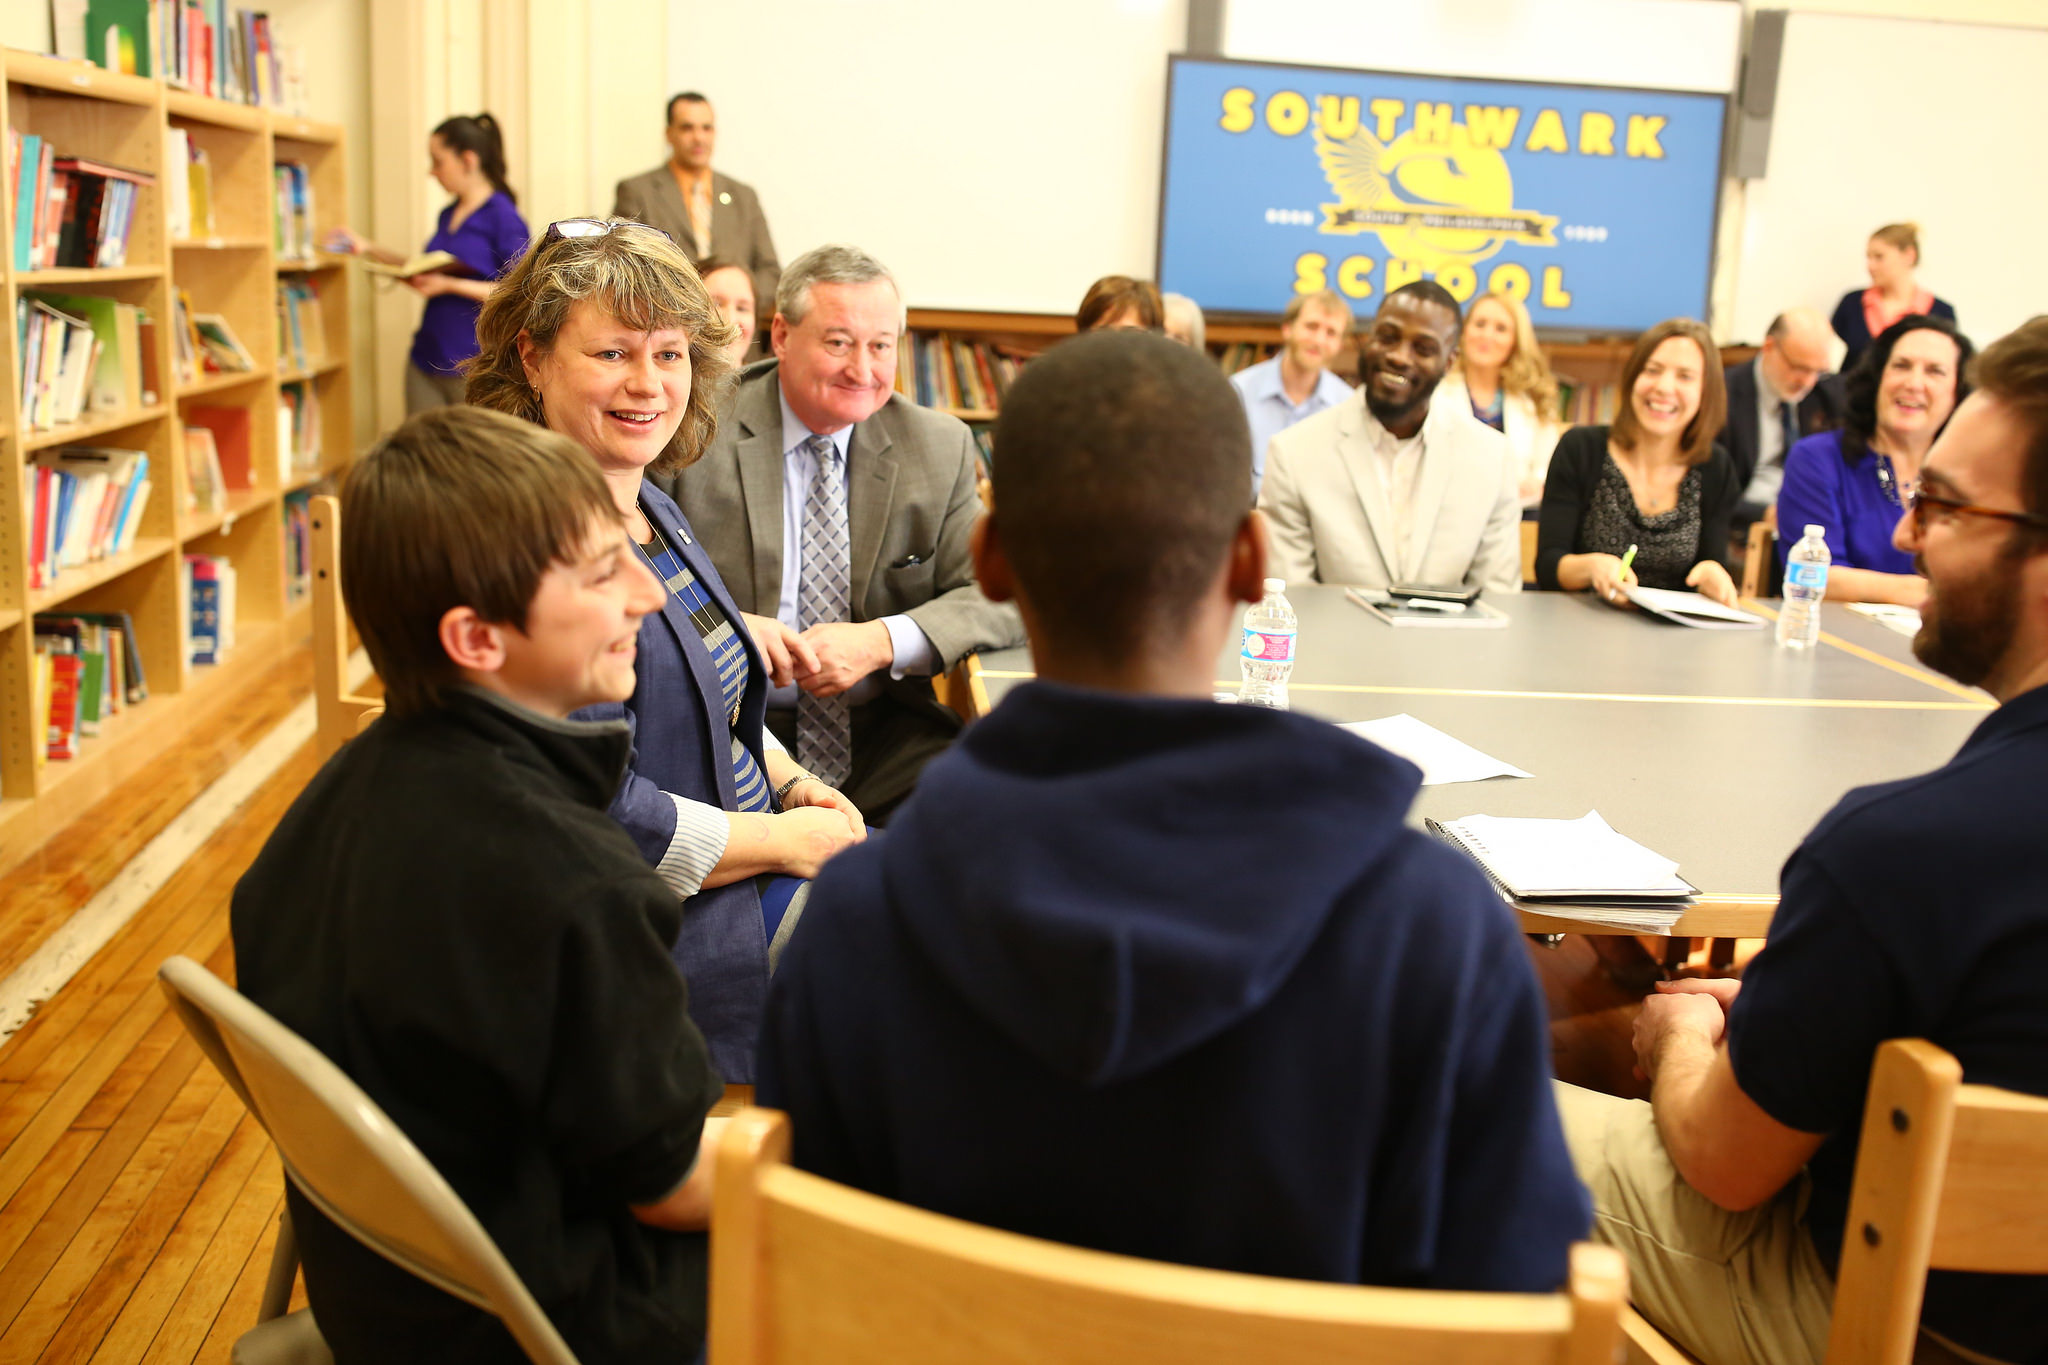 Mayor Kenney meets with parents, students, school staff and service providers at Southwark Elementary School in South Philadelphia to discuss how community schools help students succeed.